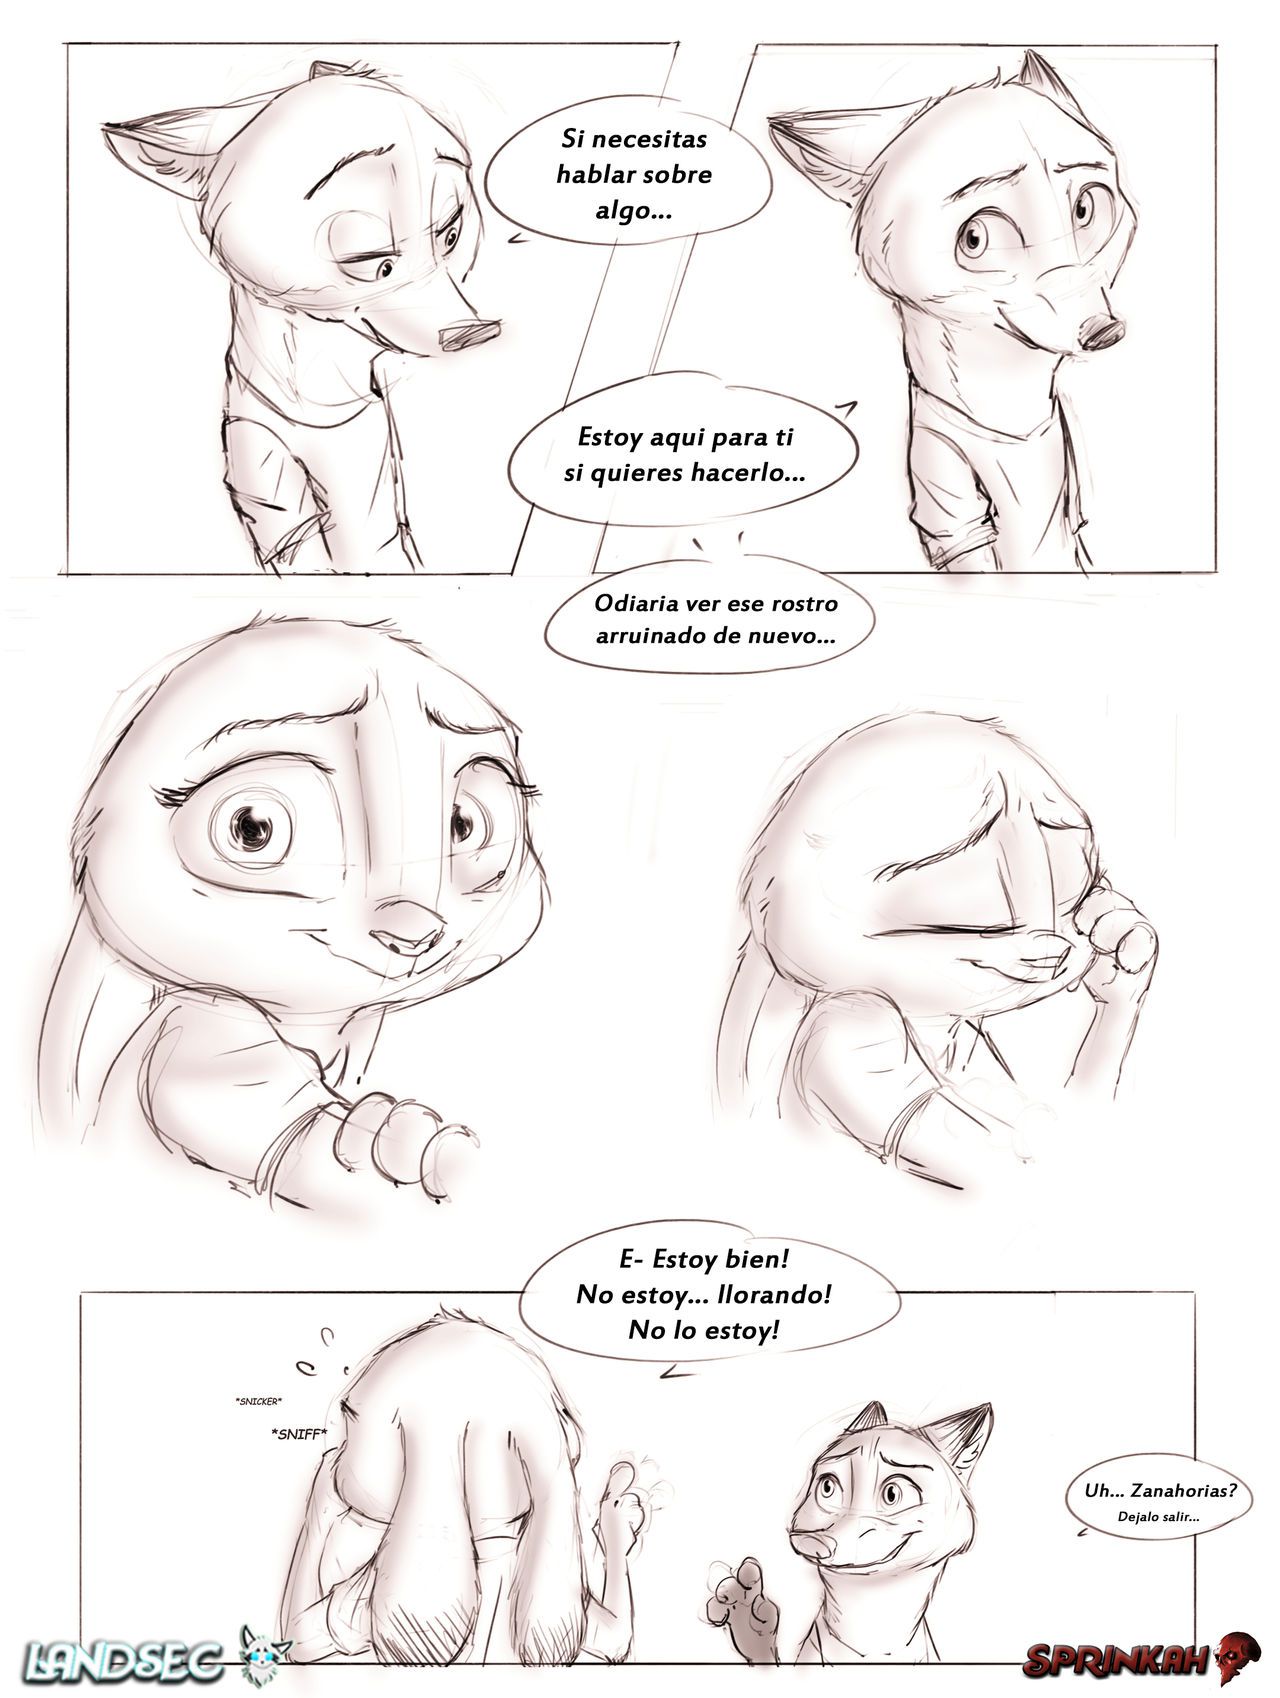 [Sprinkah] This is what true love looks like (Zootopia) (Spanish) (On Going) [Landsec] http://sprinkah.tumblr.com/ 45